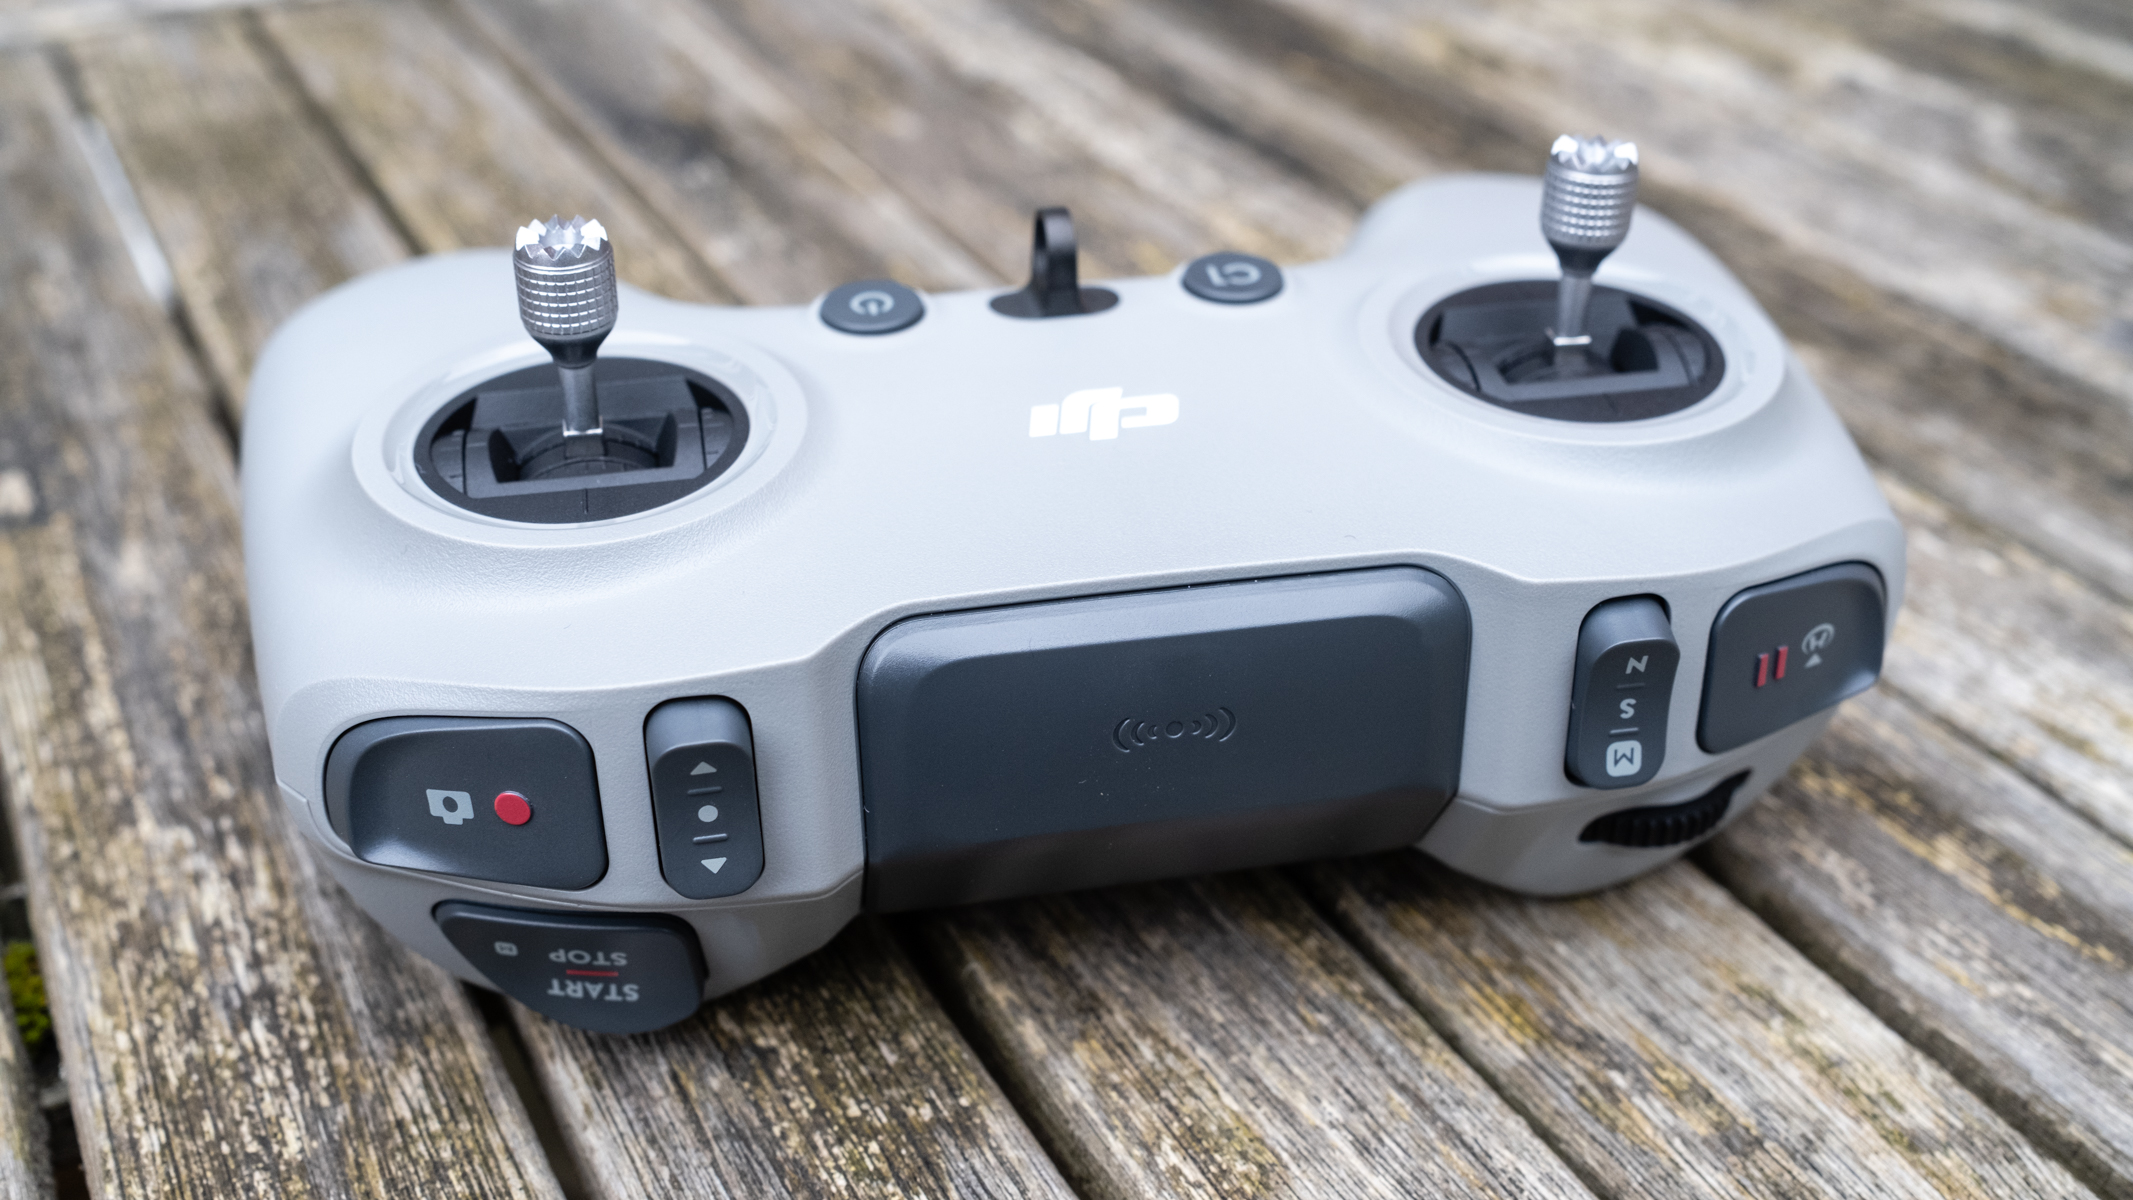 DJI FPV Remote Controller 3 buttons and switches